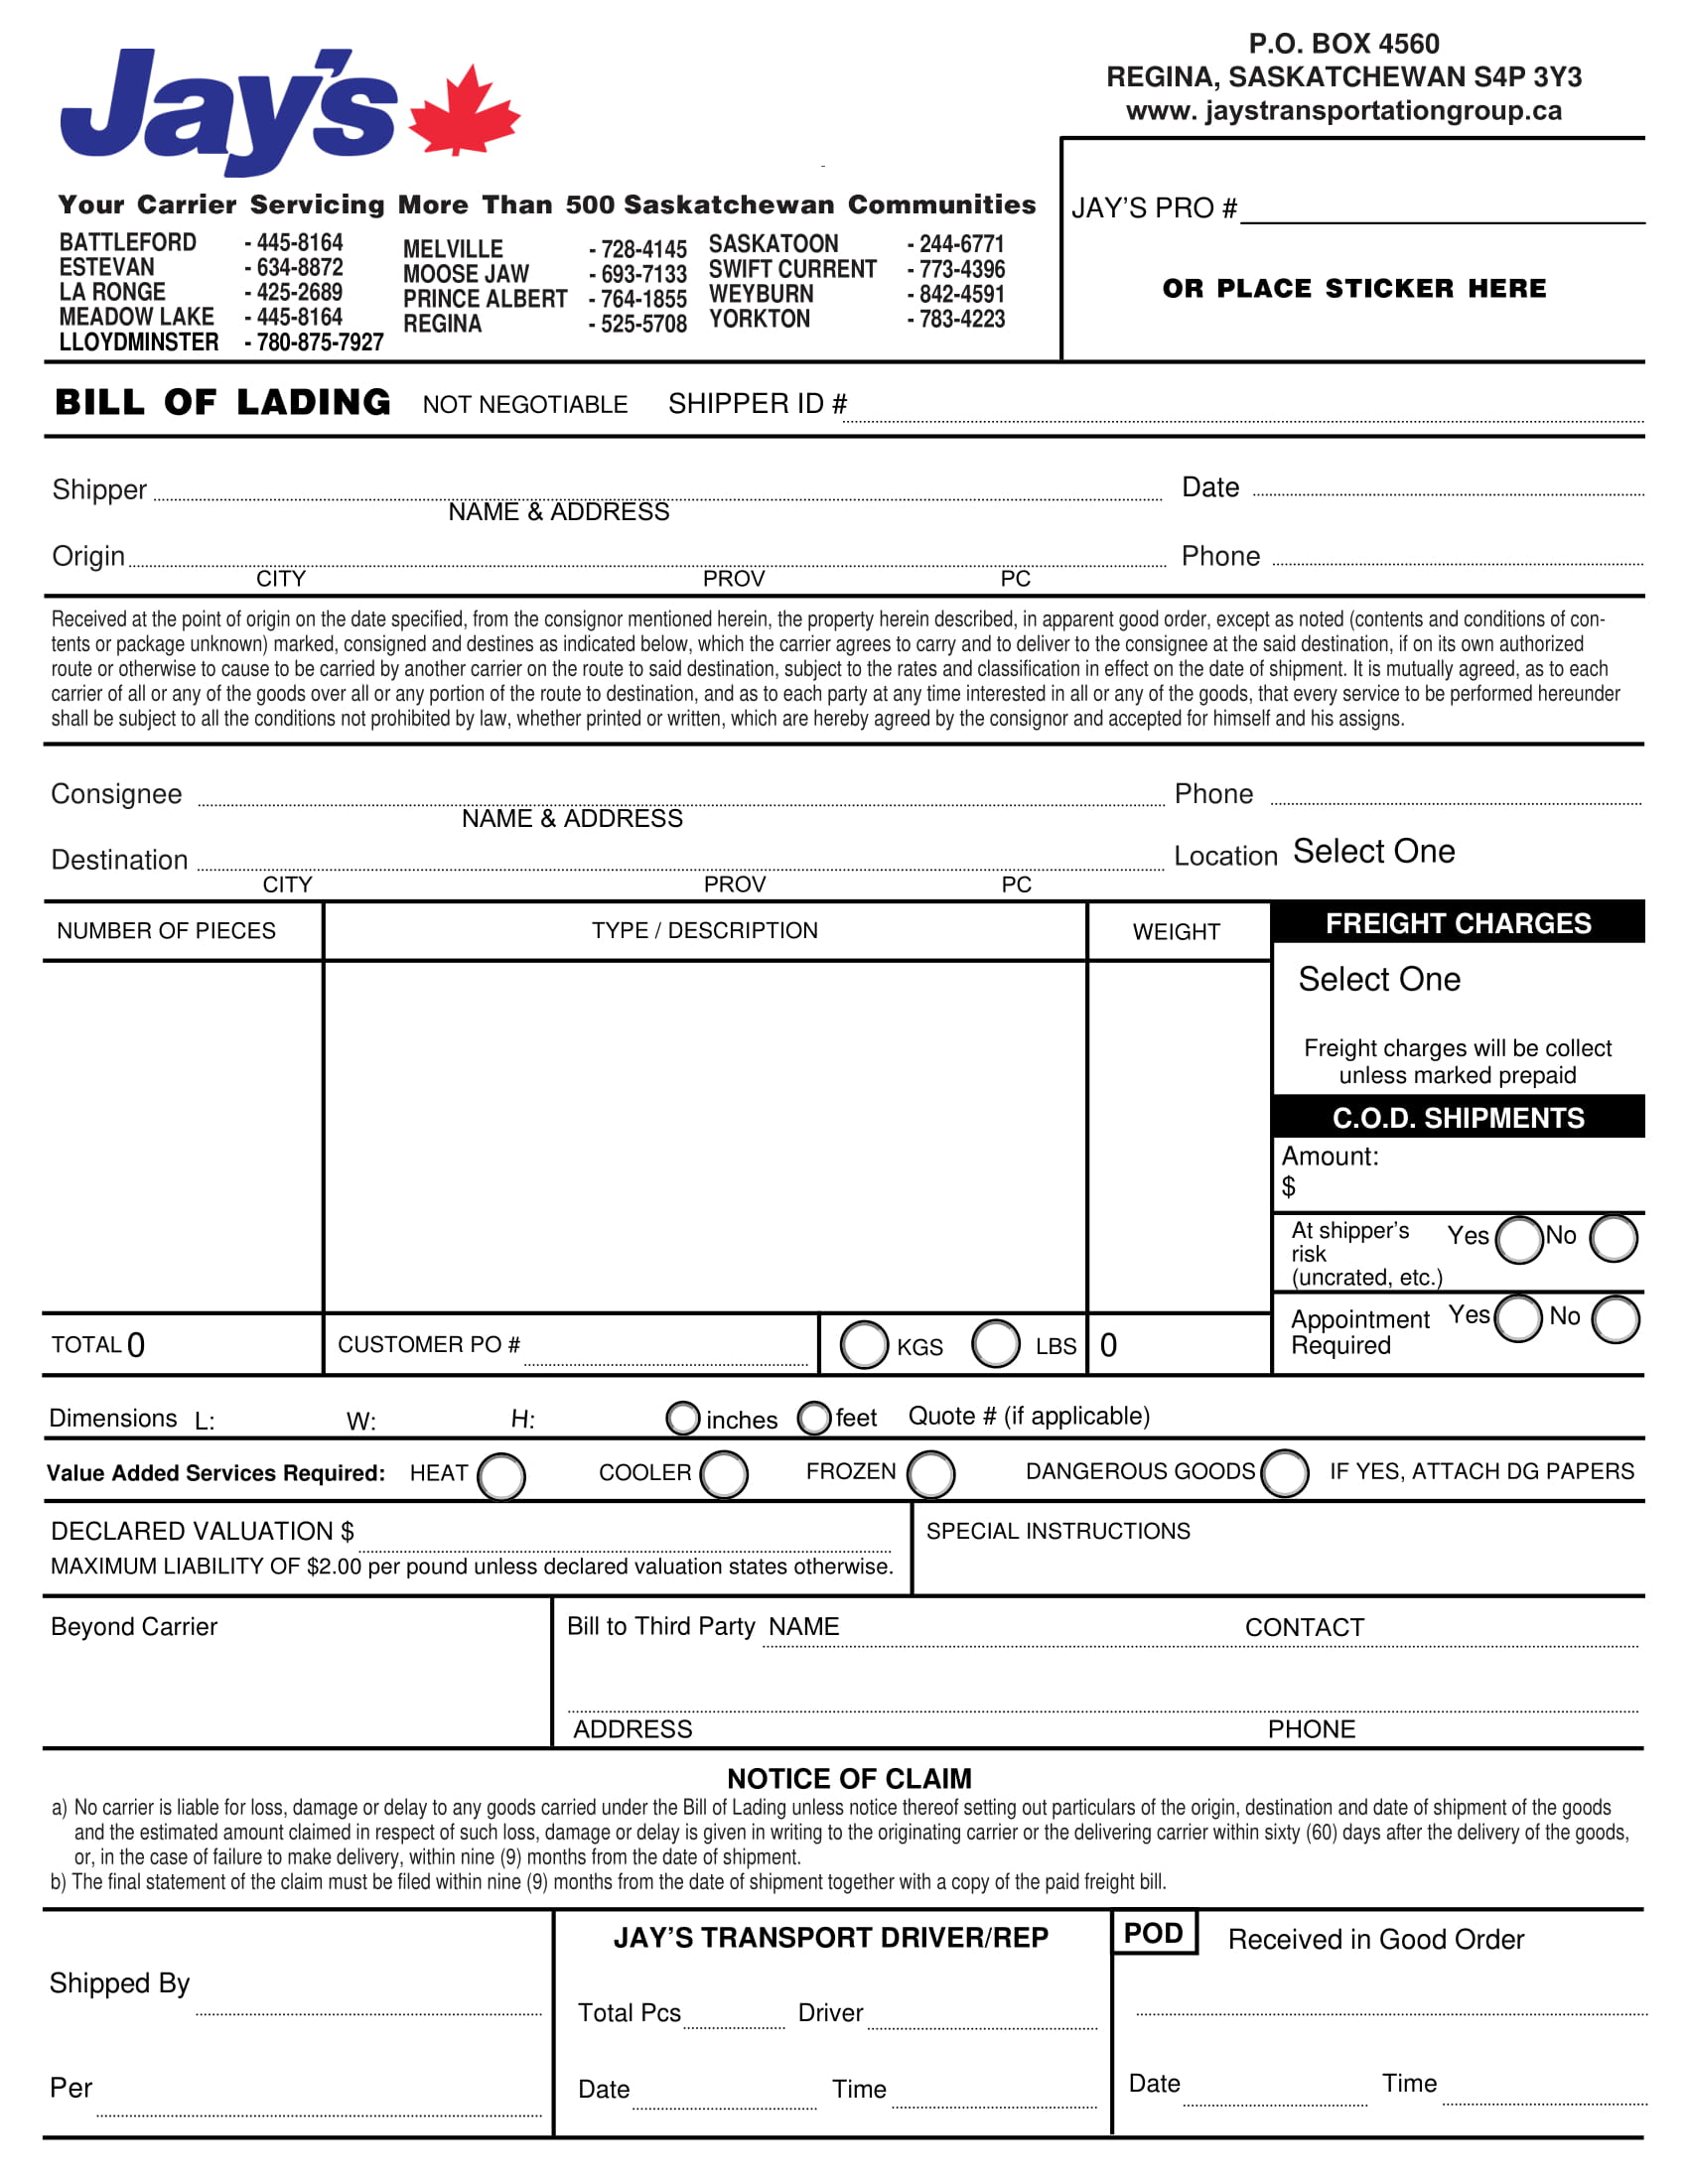 baltimore-form-c-bill-of-lading-five-1902-baltimore-ohio-rr-bill-of-lading-forms-ebay